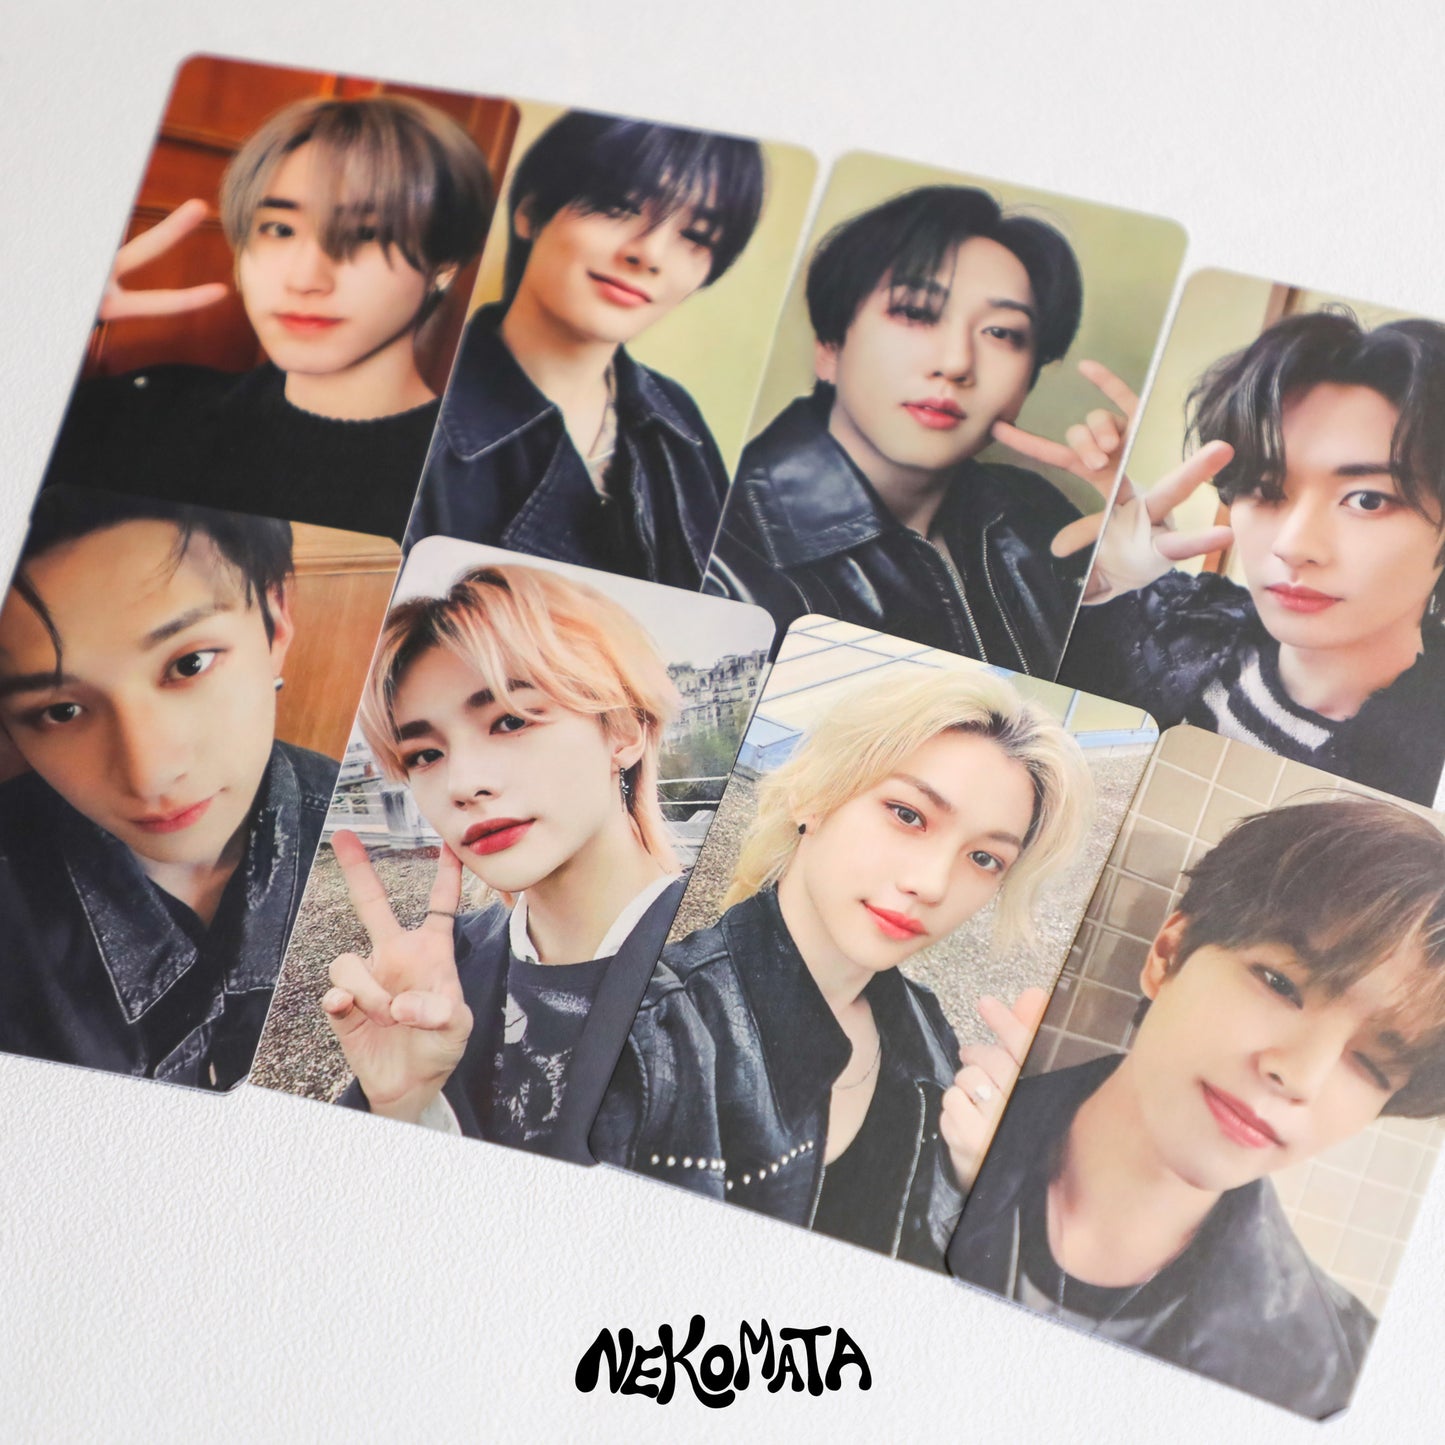 STRAY KIDS '5-Star' Fanmade PHOTOCARDS